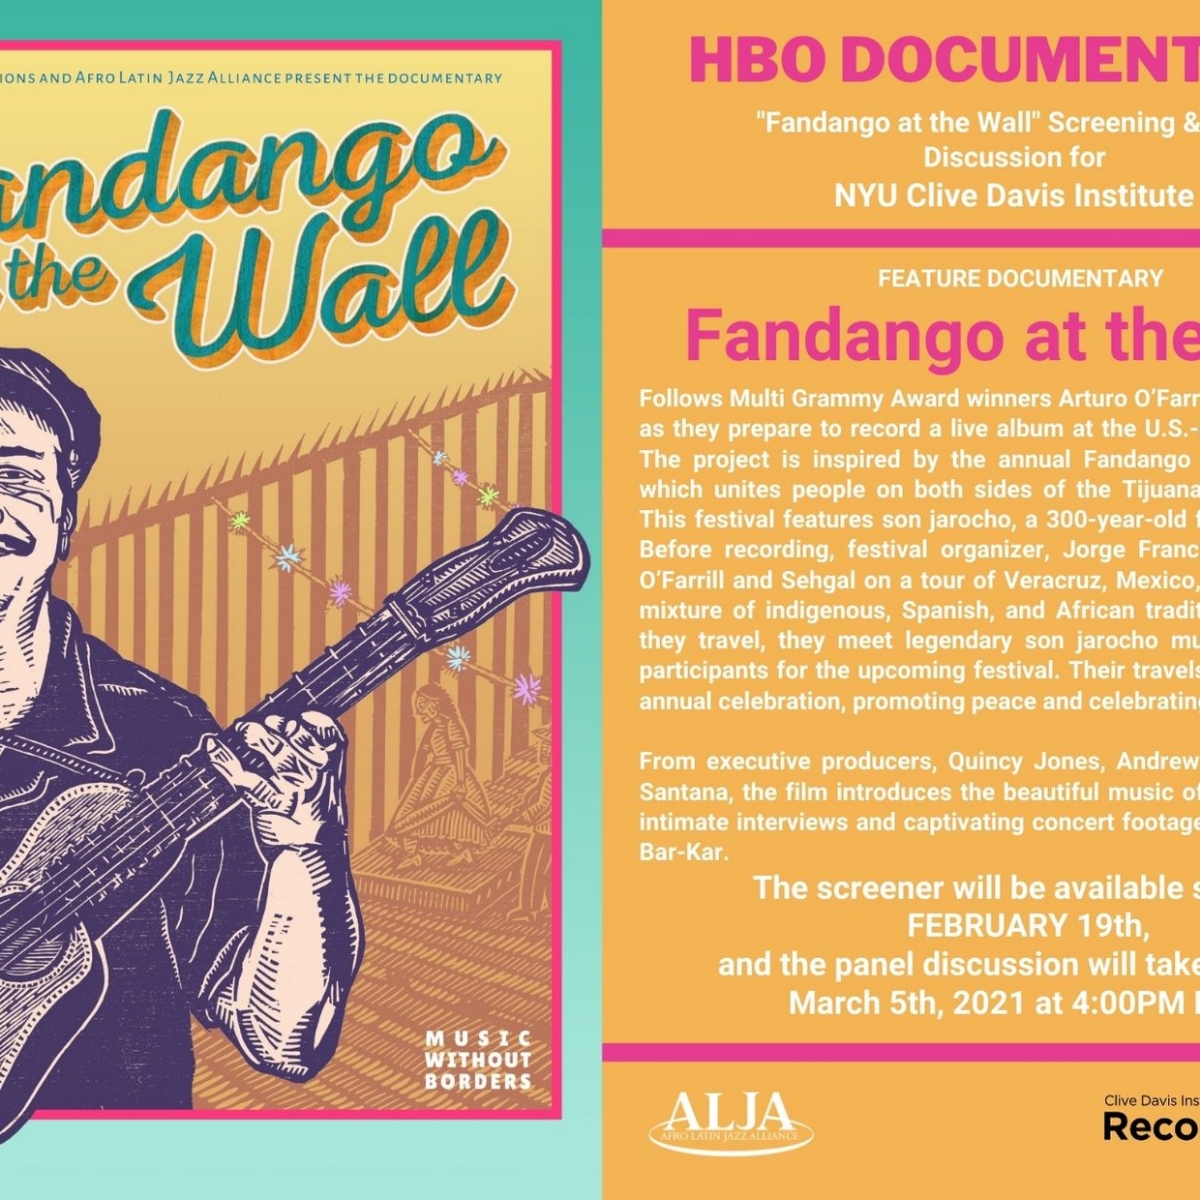 FANDANGO AT THE WALL Screening & Panel Discussion for Clive Davis Institute